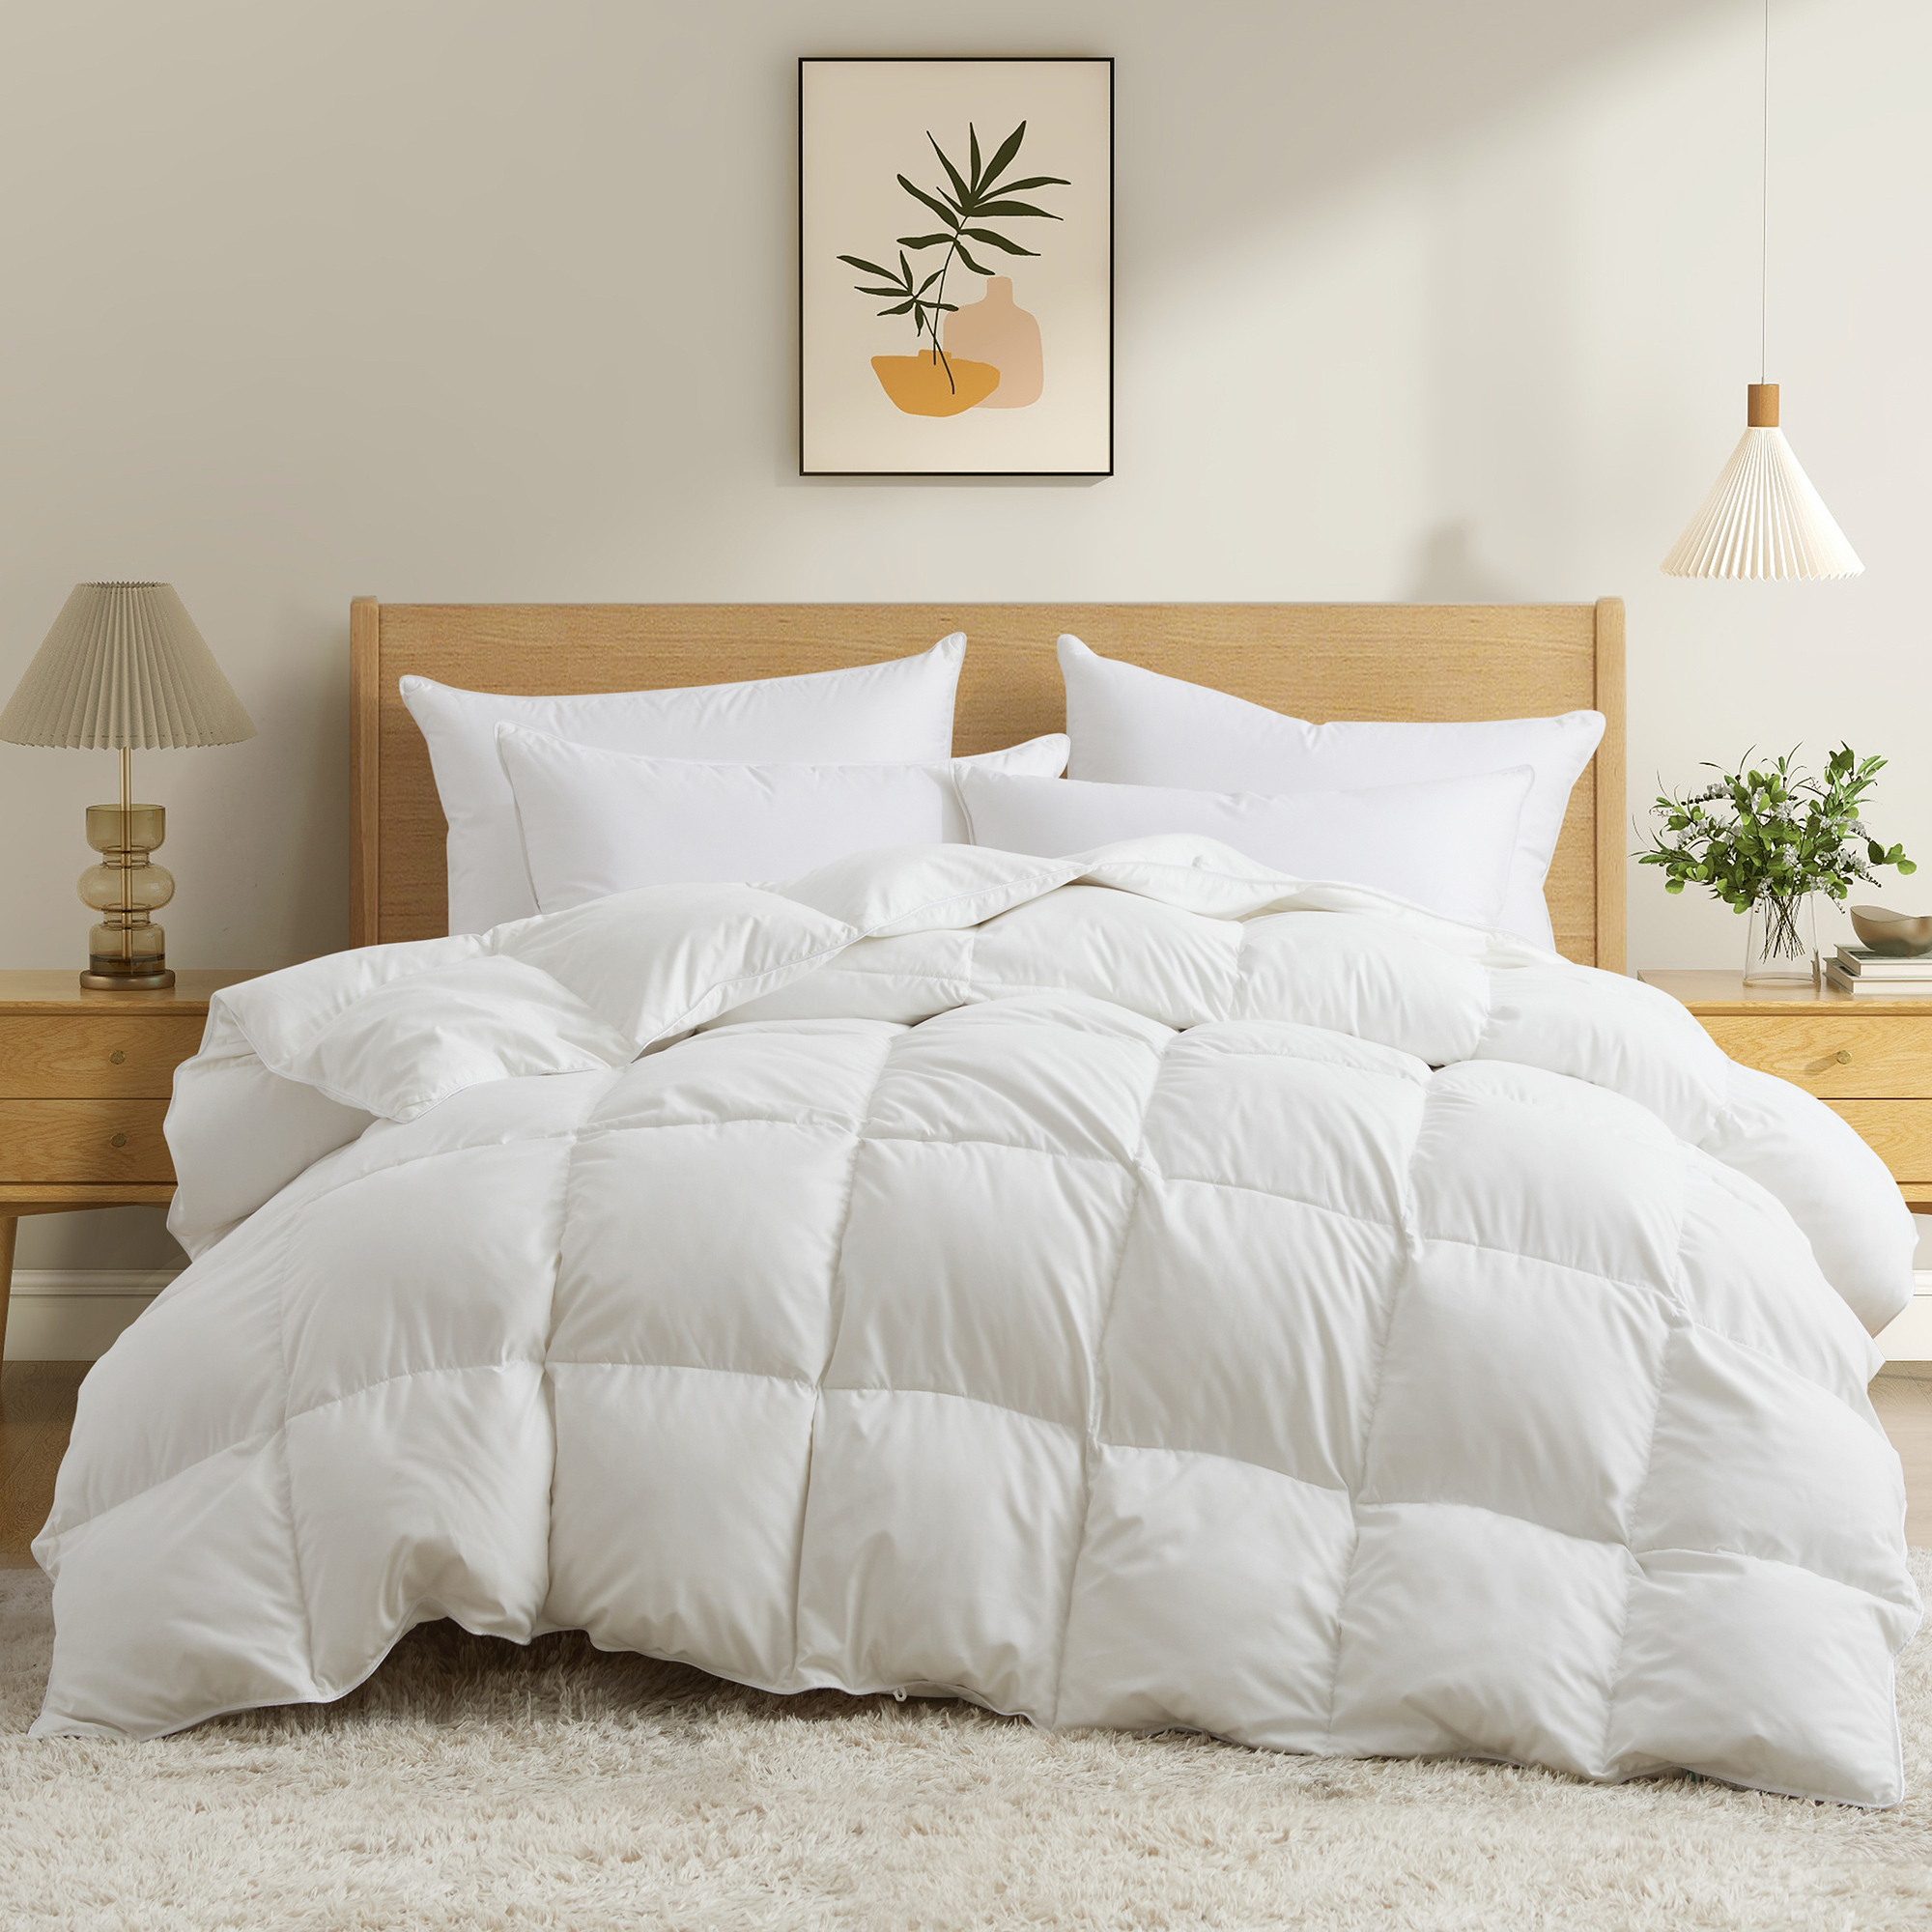 Extra Warmth Down Comforter For Winter, Heavy Weight Comforter Ultra Soft Quilted Duvet Insert With Corner Tabs - Full/Queen